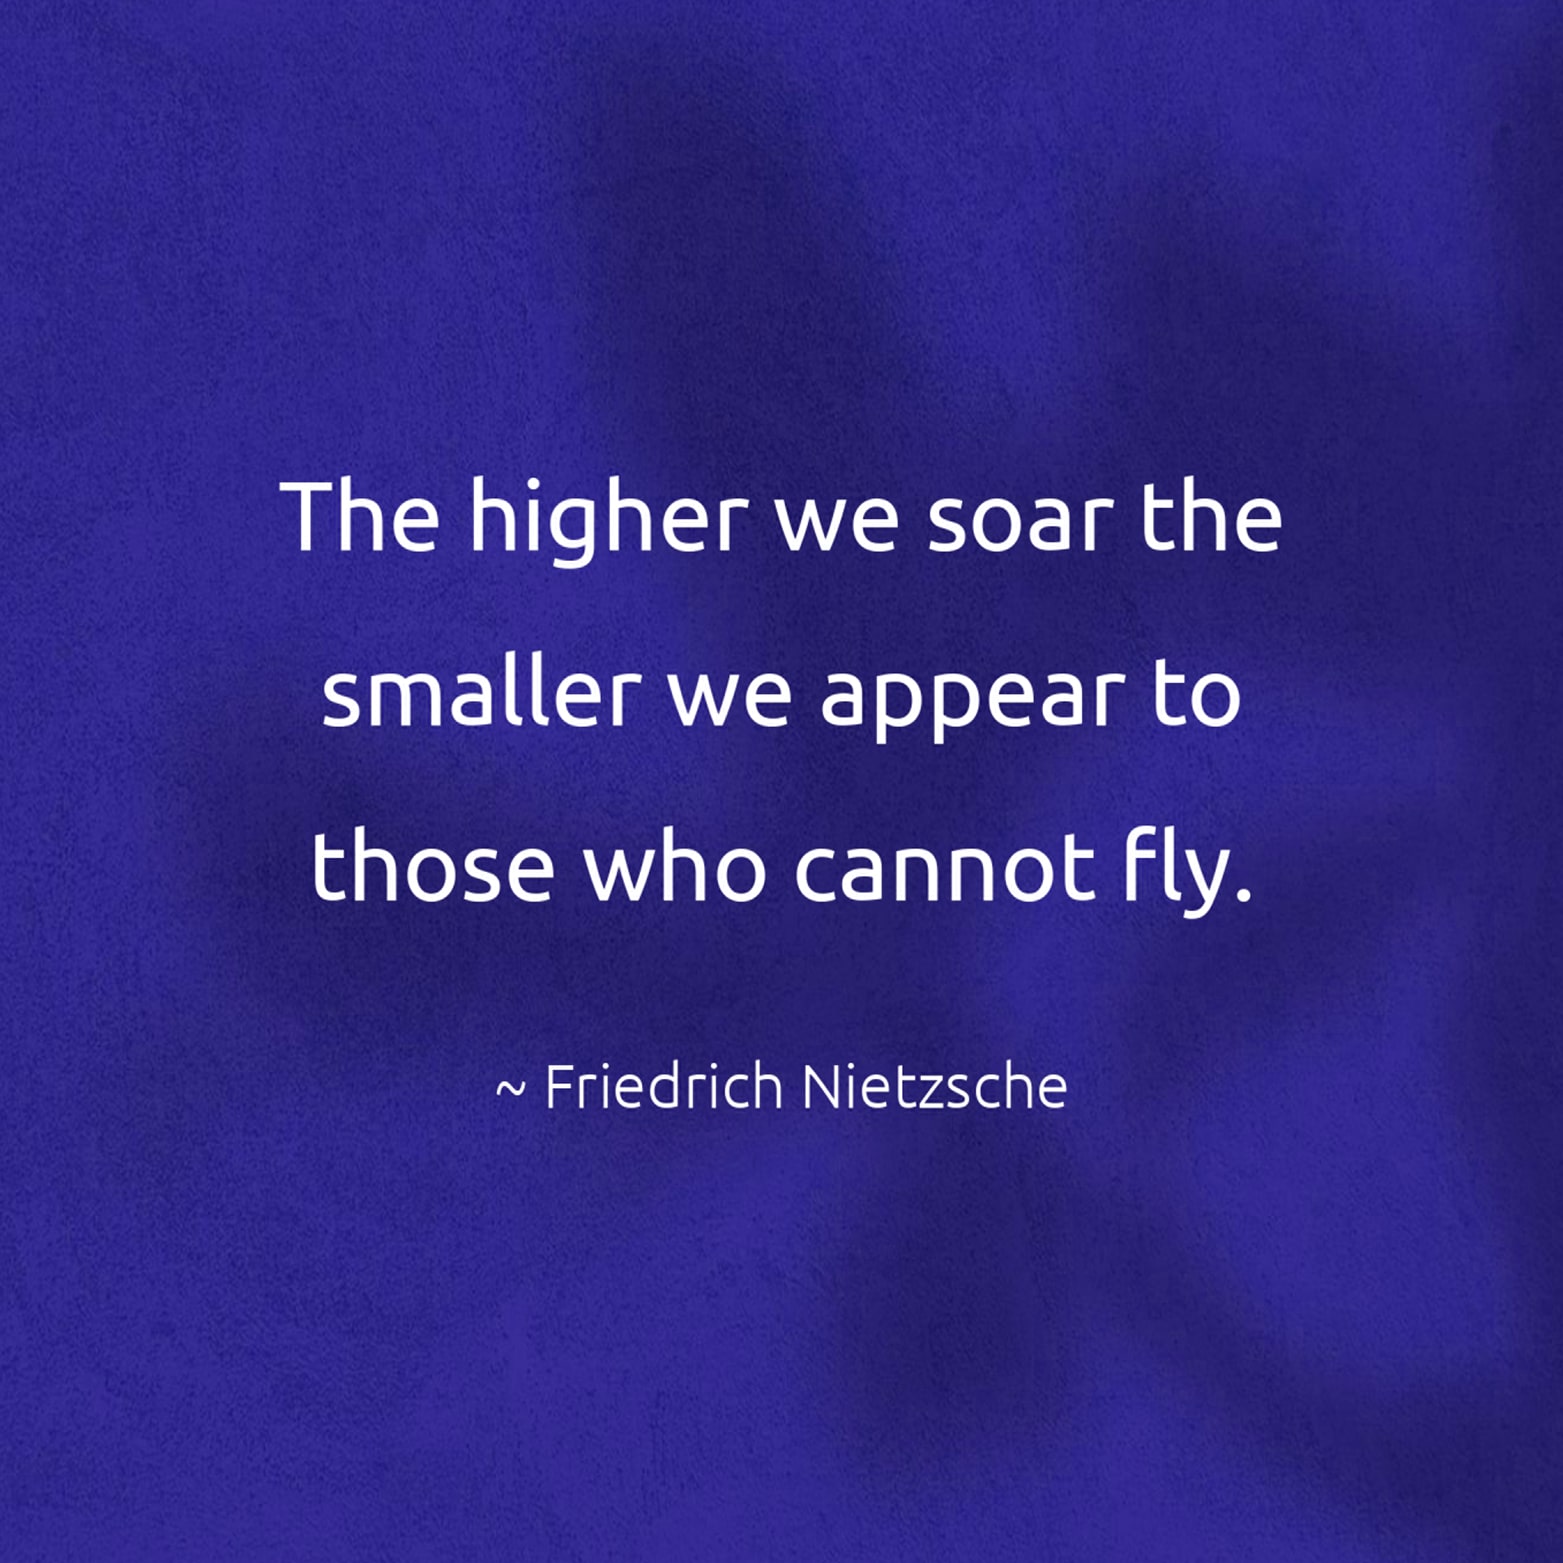 The higher we soar the smaller we appear to those who cannot fly. - Friedrich Nietzsche